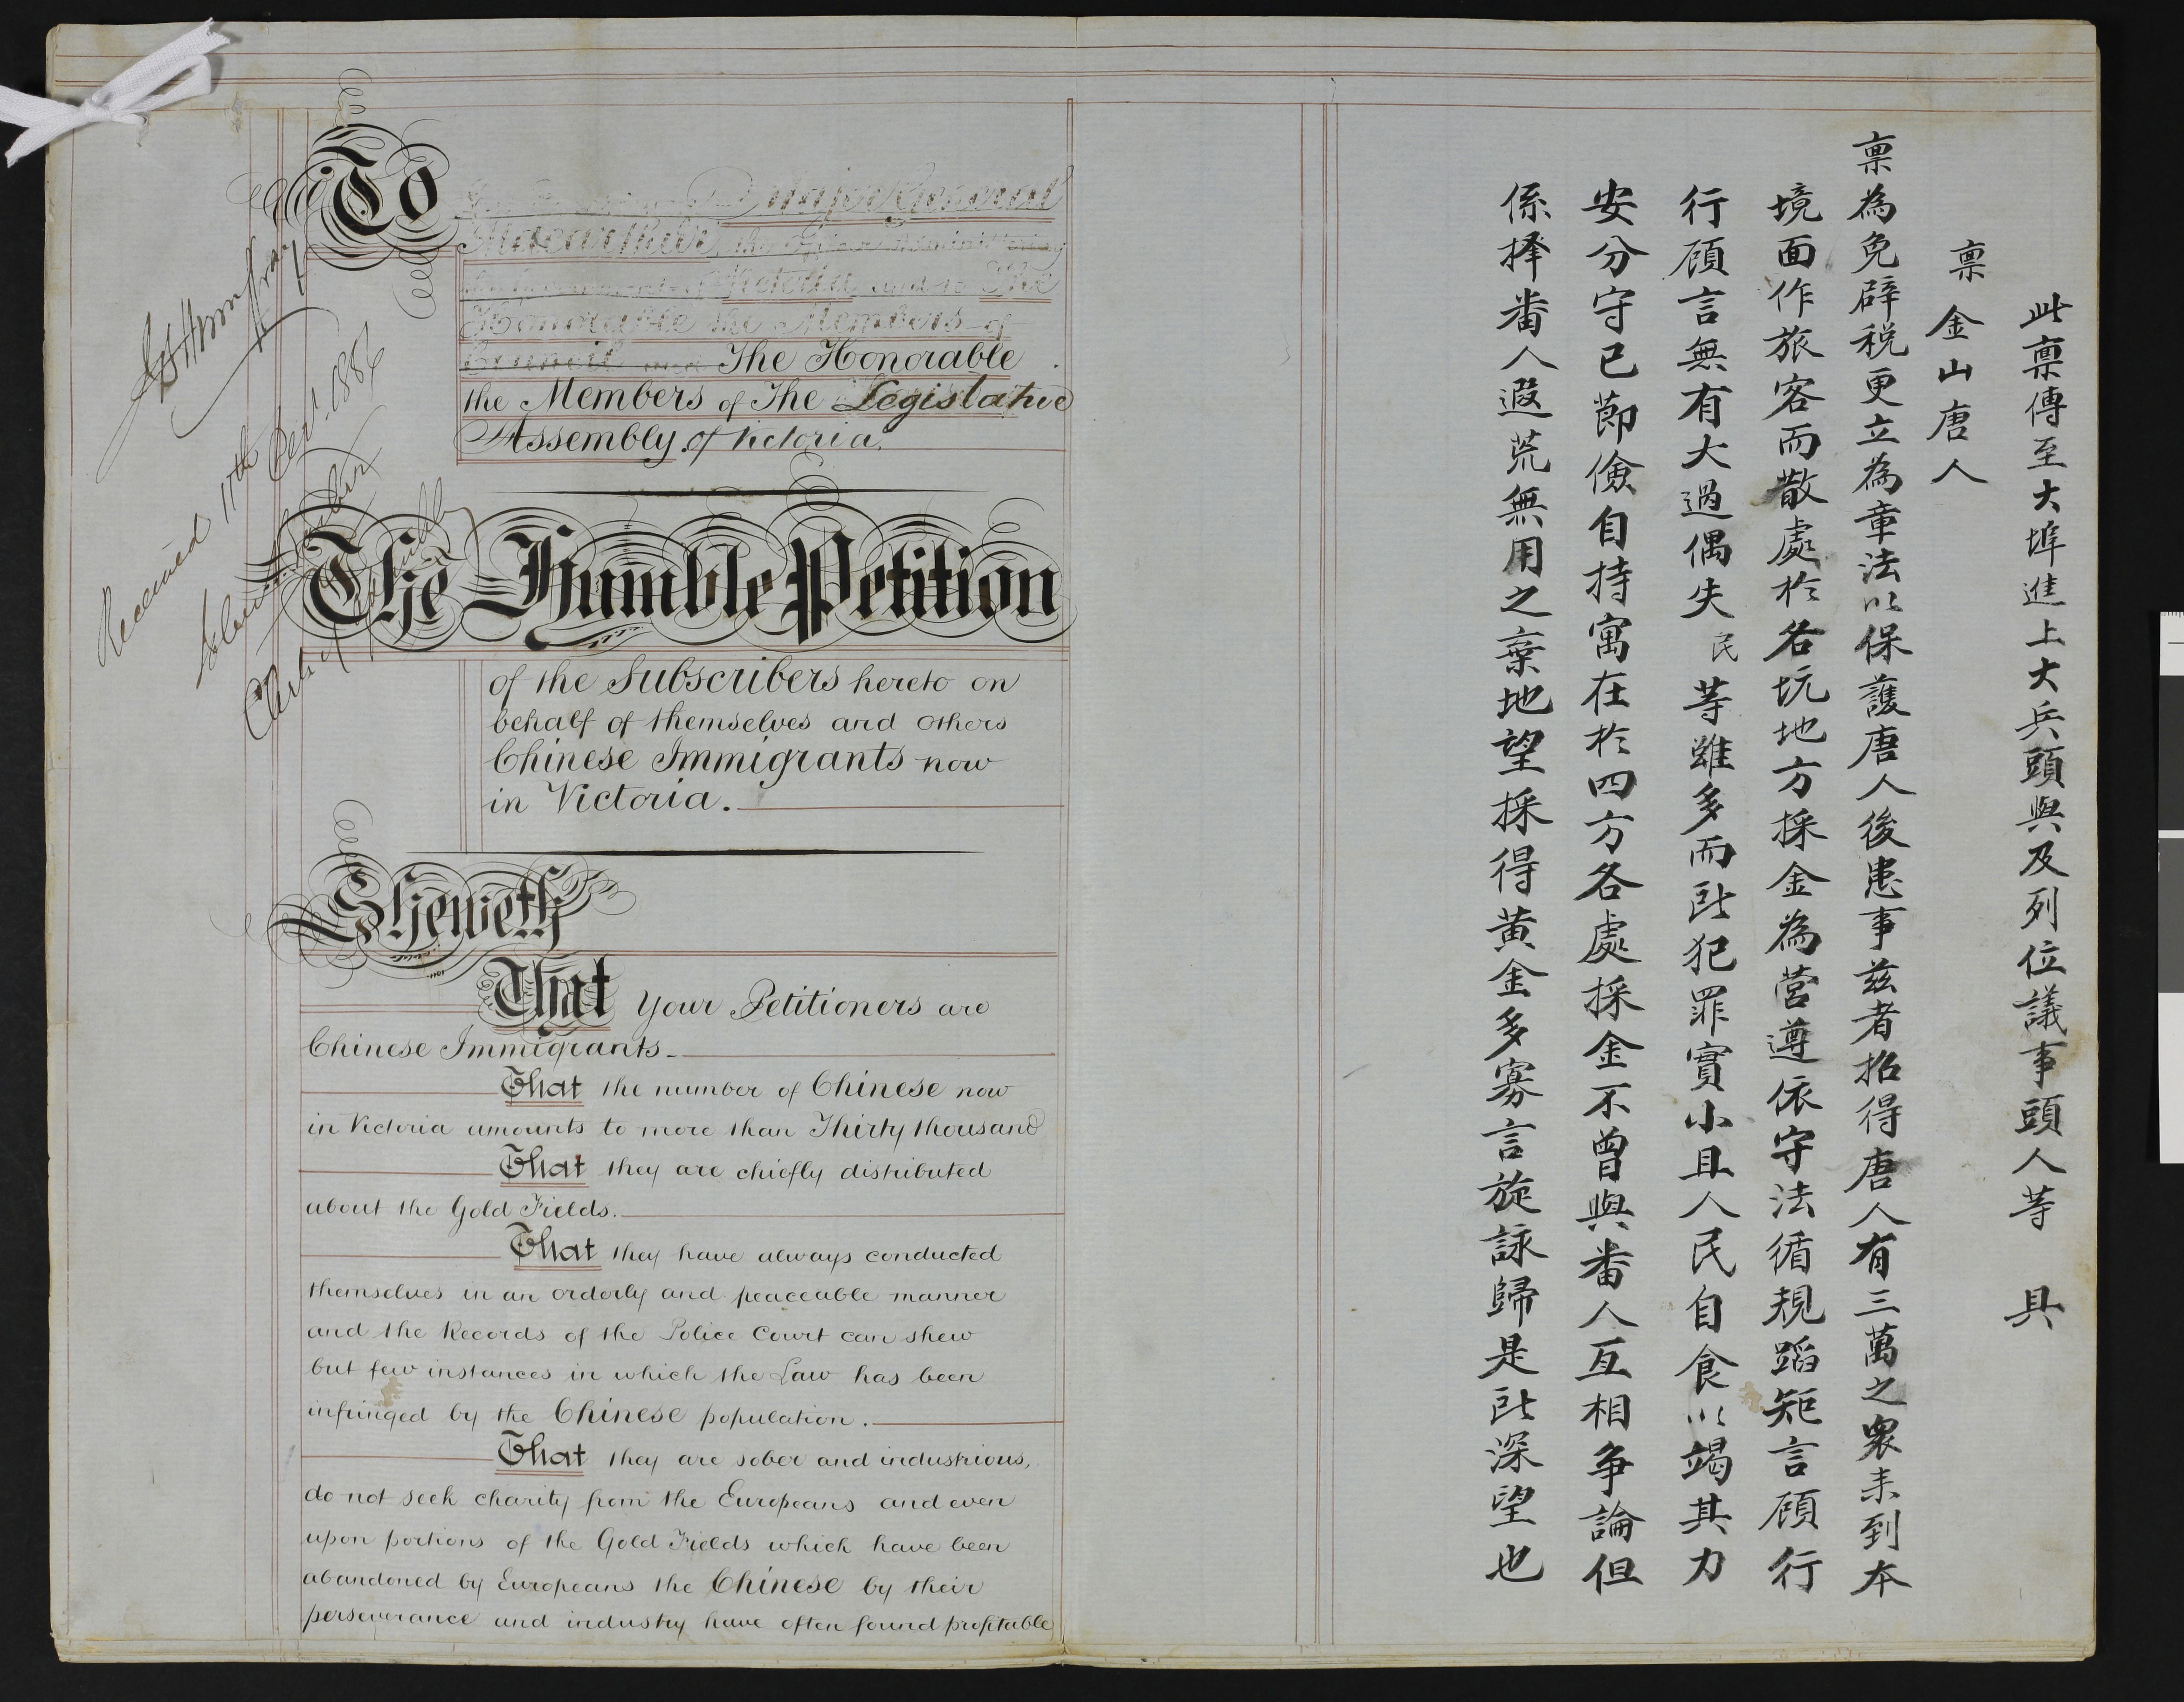 Chinese petition from Victorian goldfields 